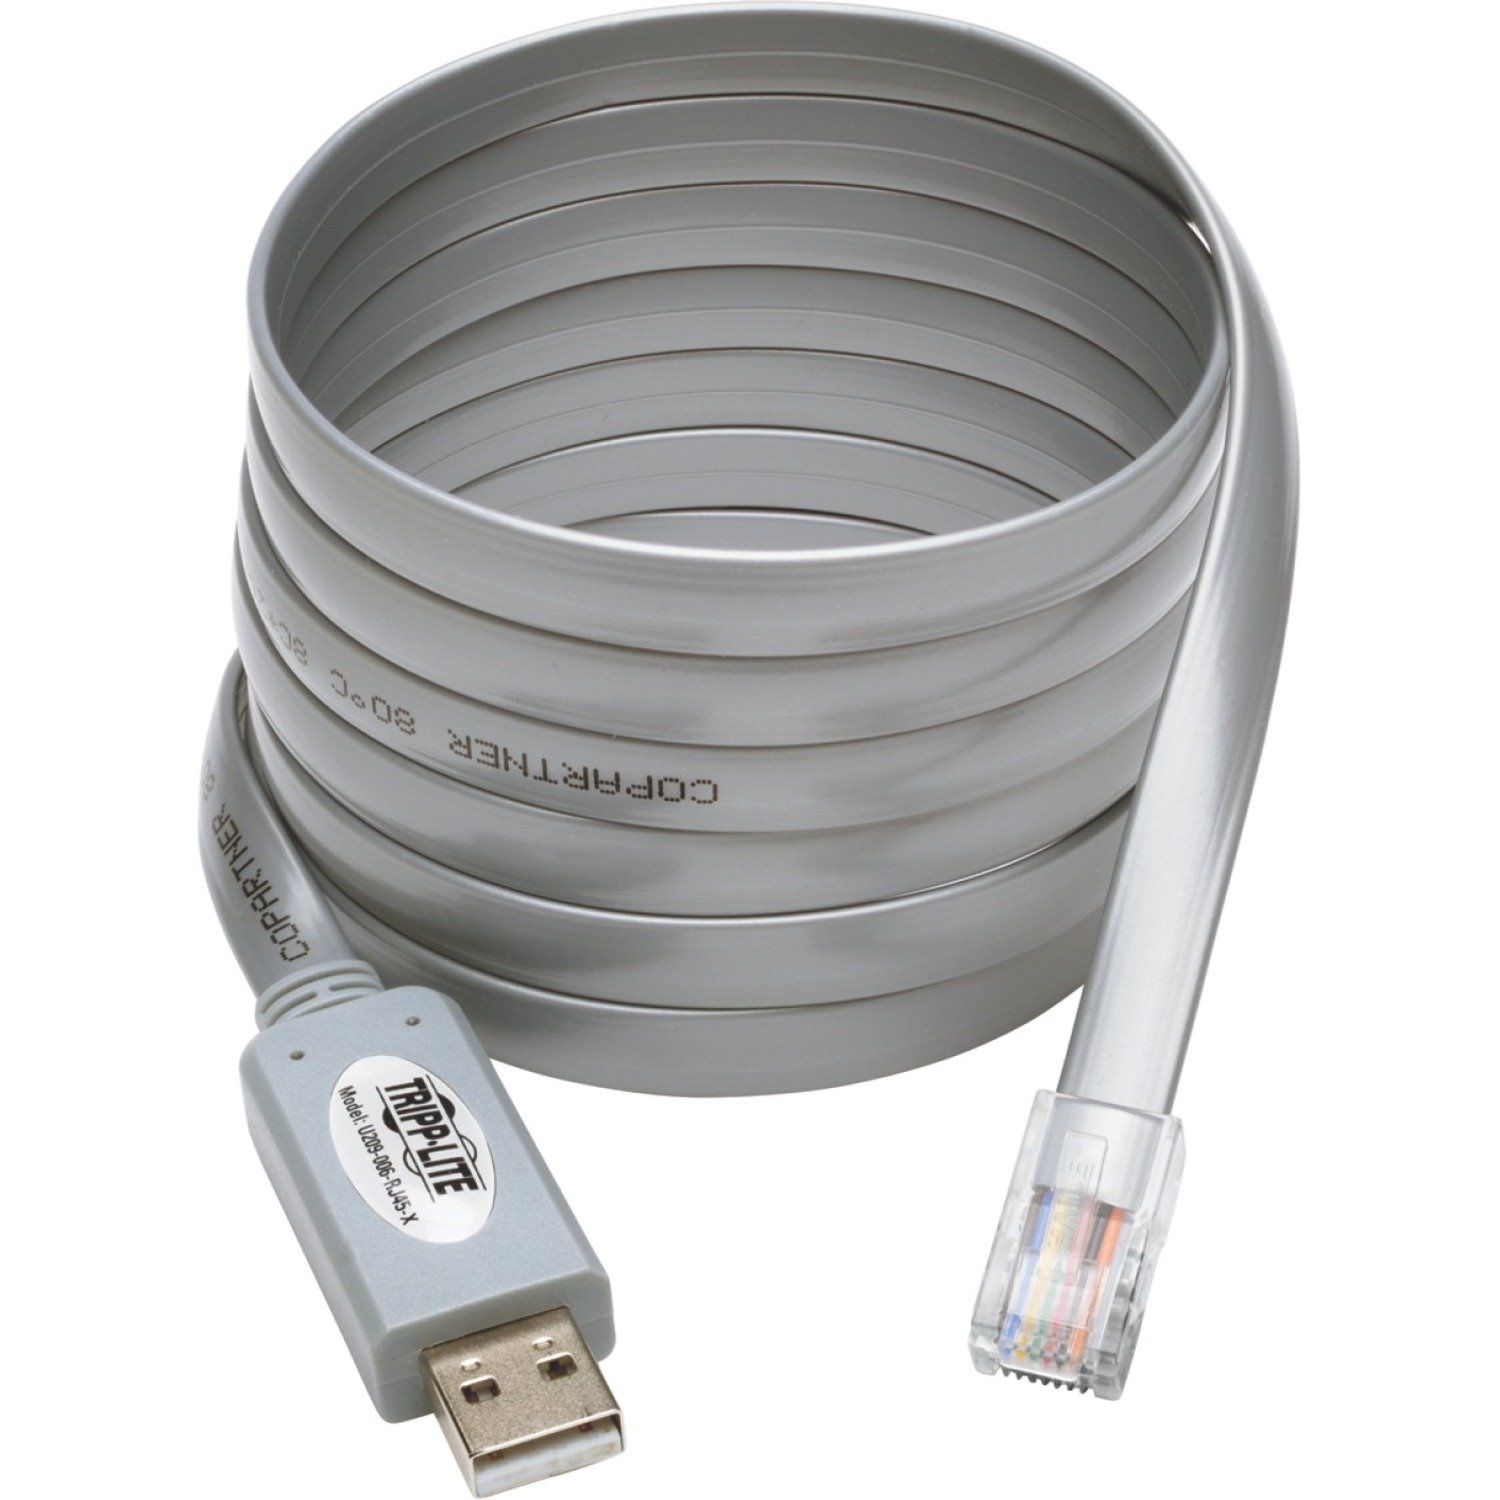 Eaton Tripp Lite Series USB-A to RJ45 Serial Rollover Cable (M/M) - Cisco Compatible, 250 Kbps, 6 ft. (1.83 m), Gray